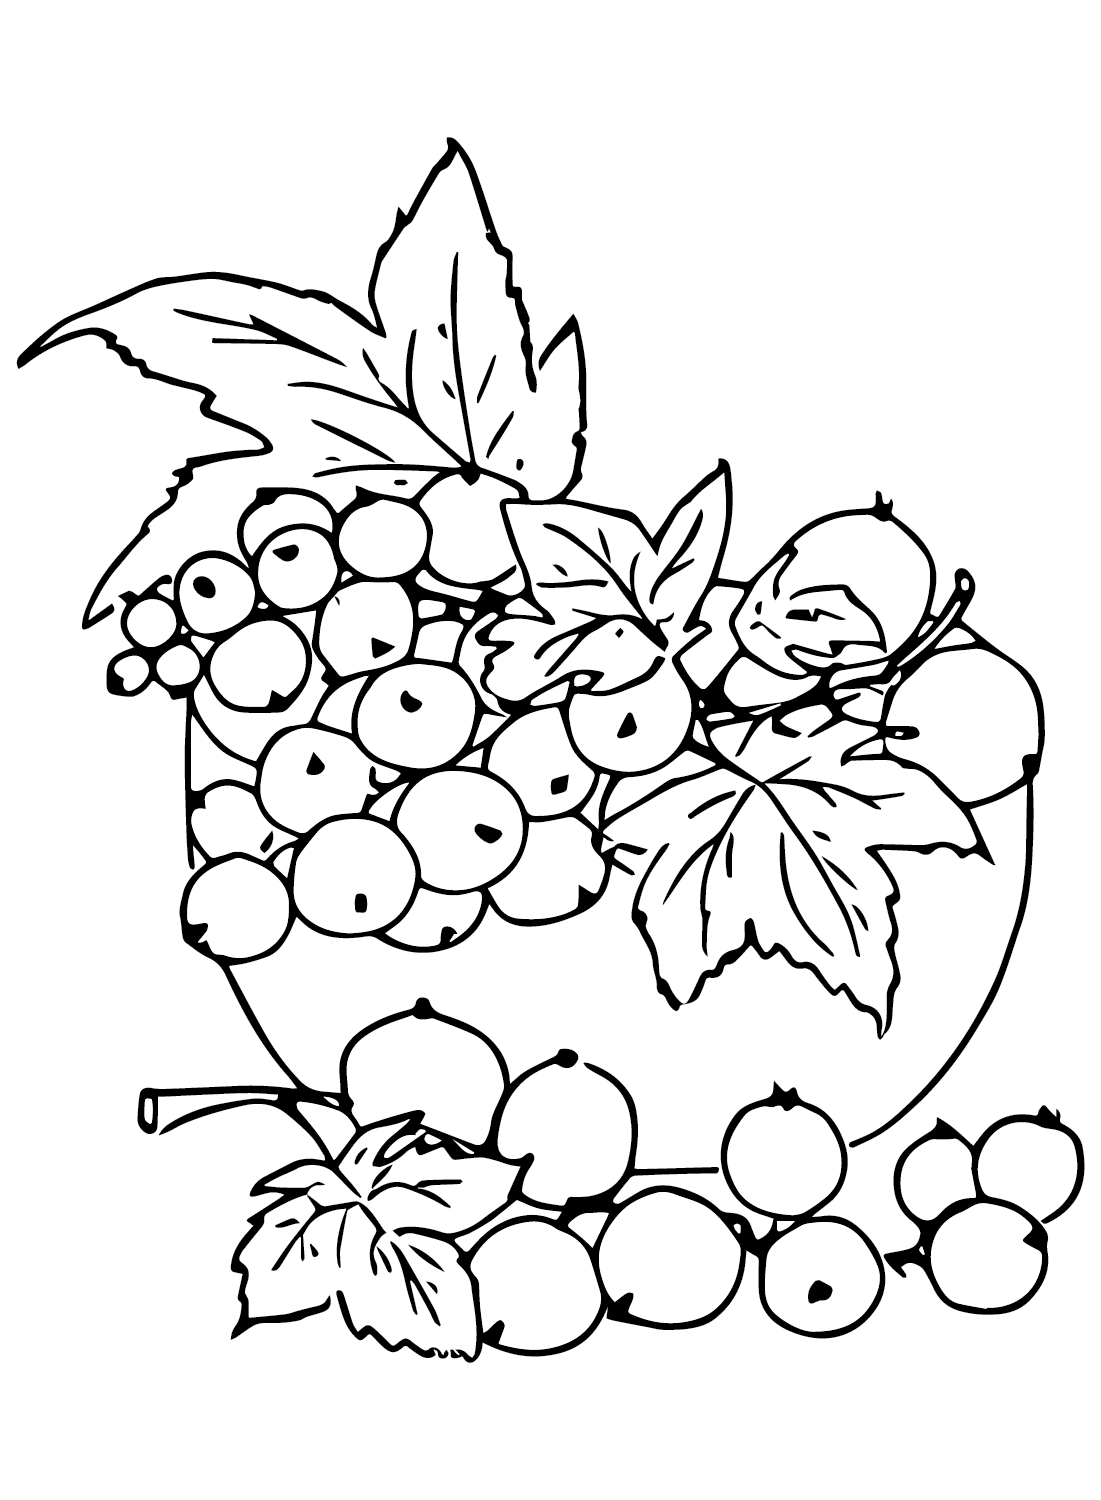 Gooseberry Fool Coloring Page